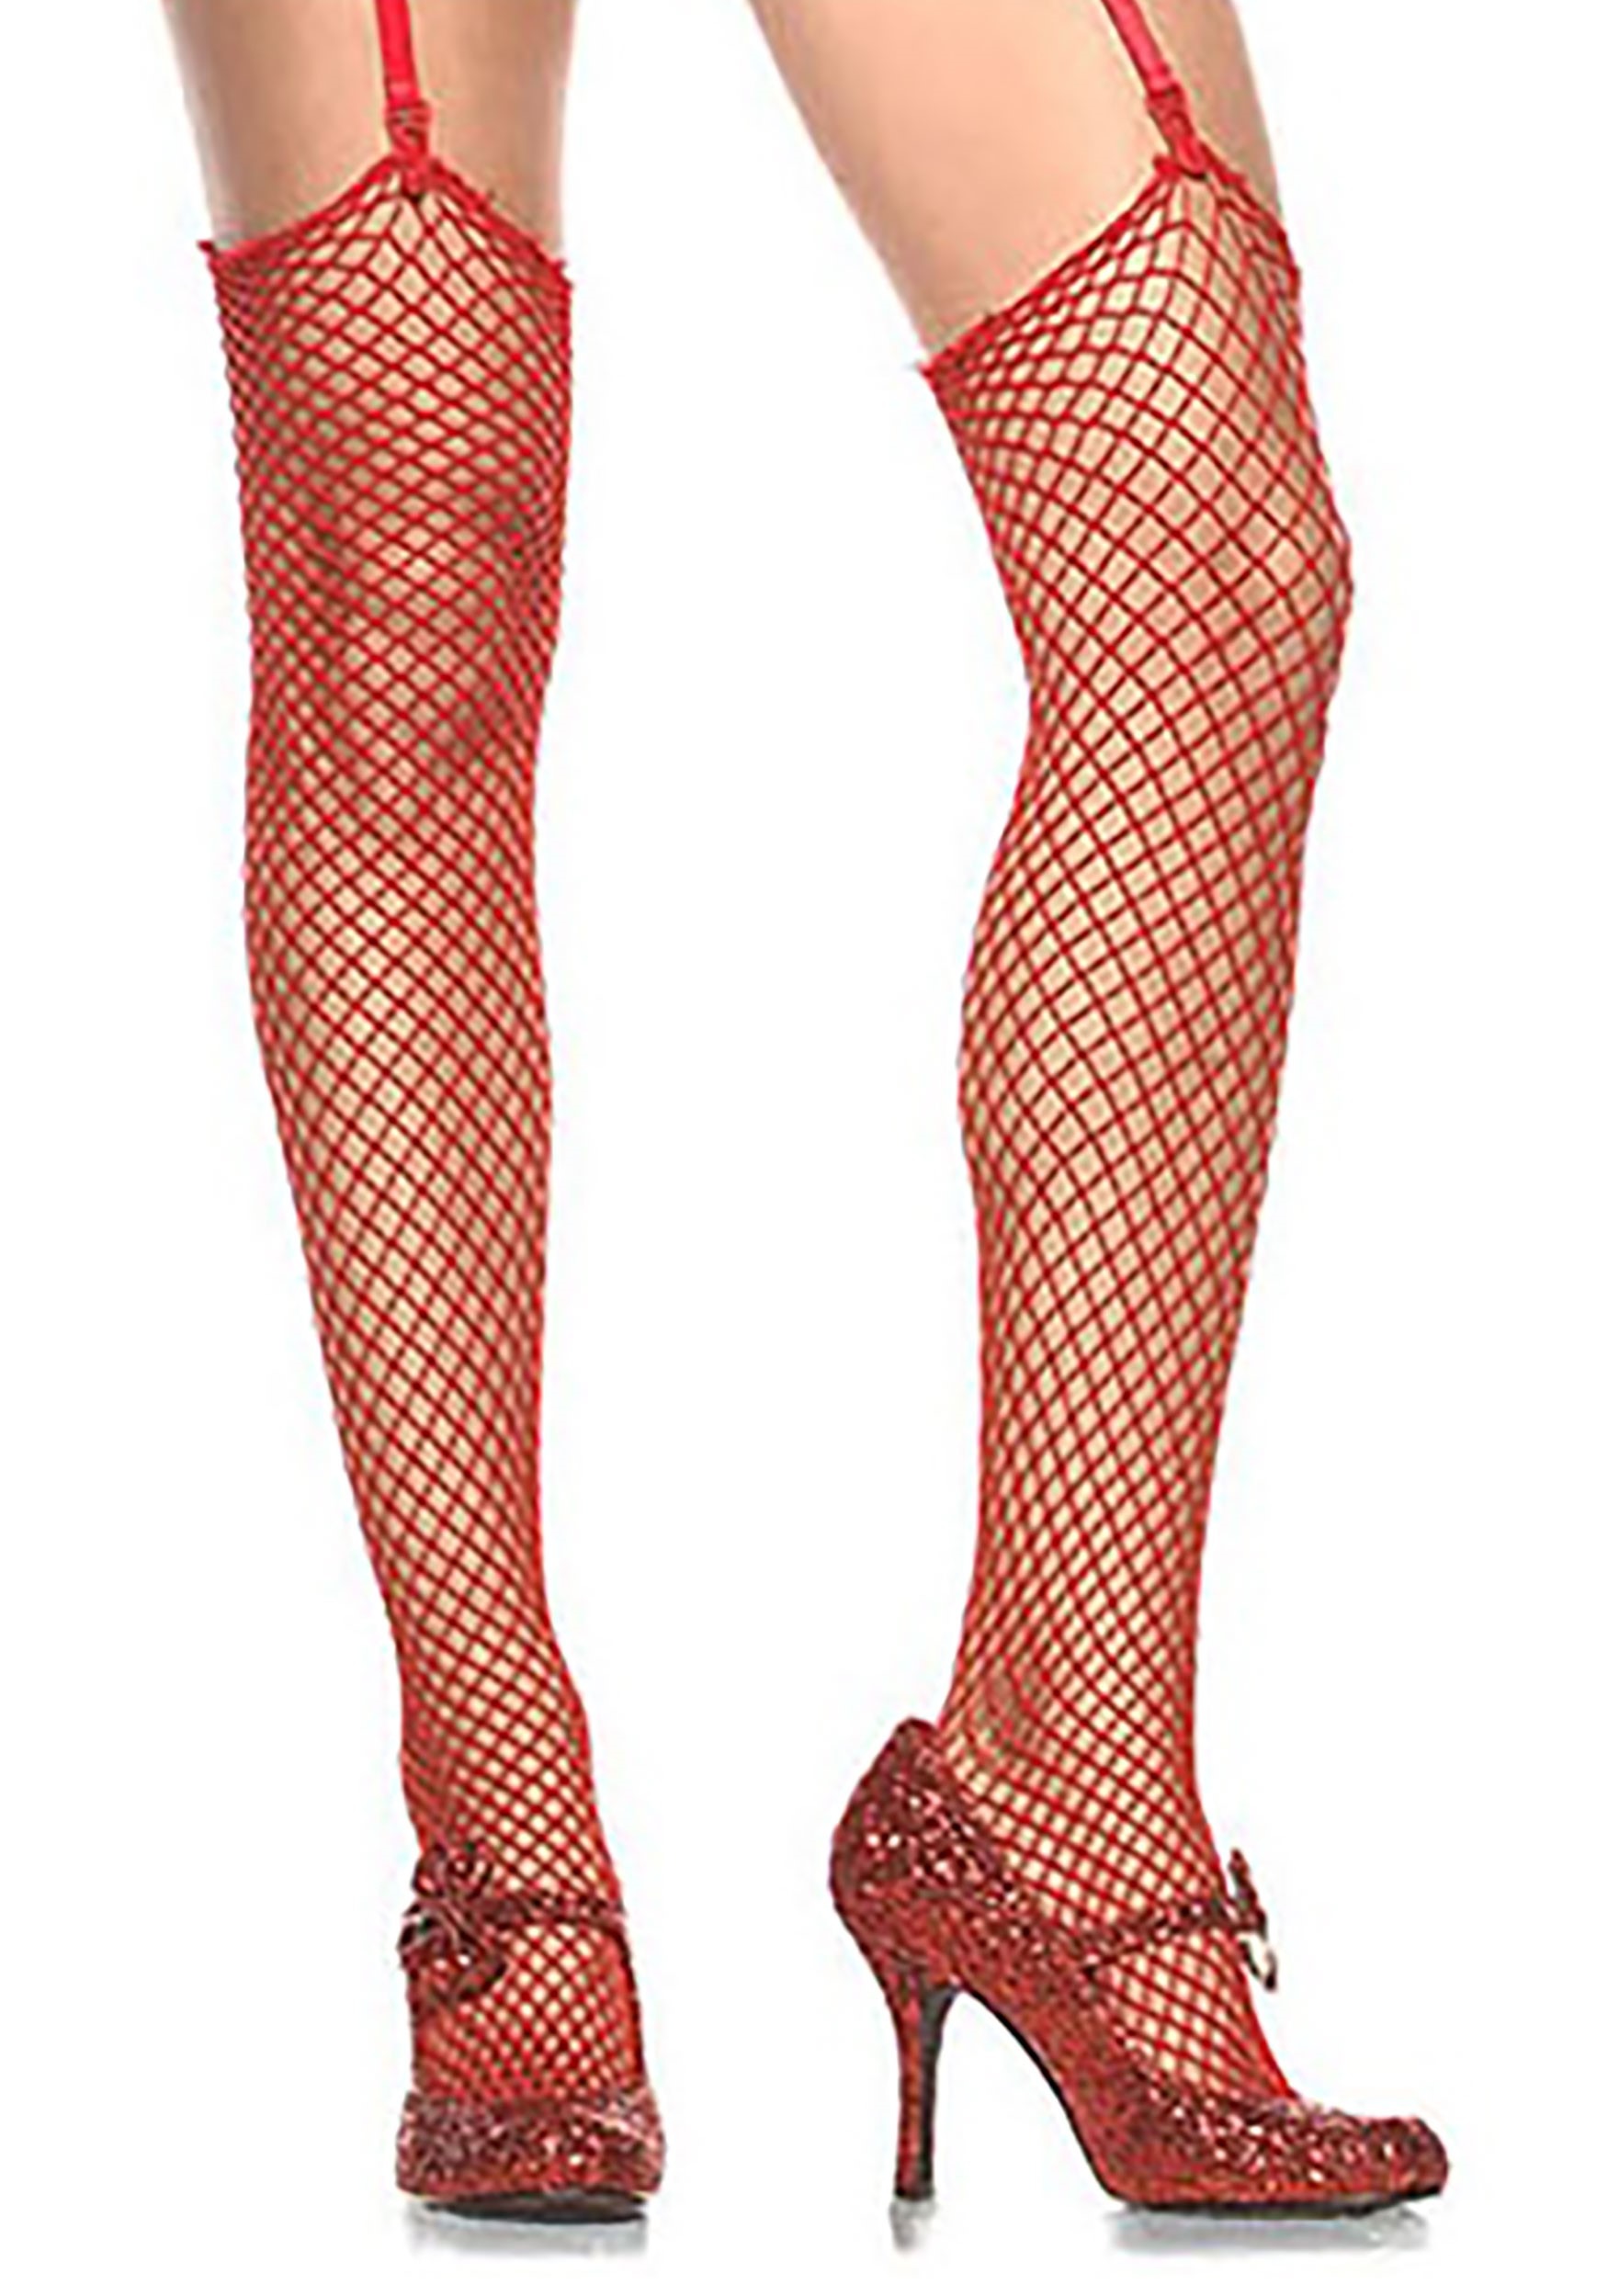 https://images.halloweencostumes.ca/products/6902/1-1/red-fishnet-stockings.jpg